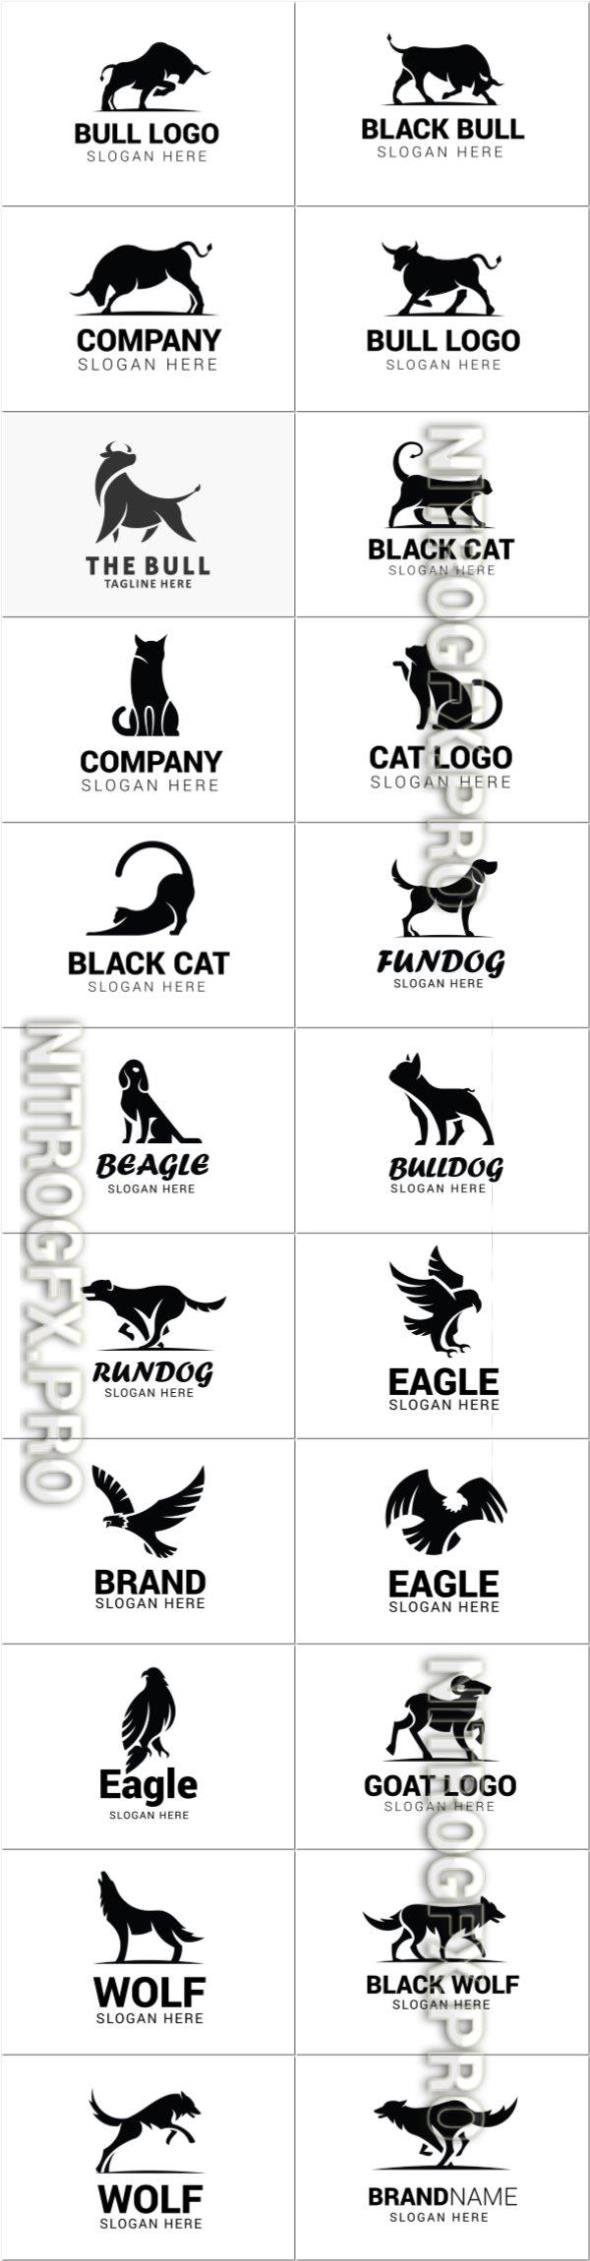 Vector logos with the image of animals for business companies